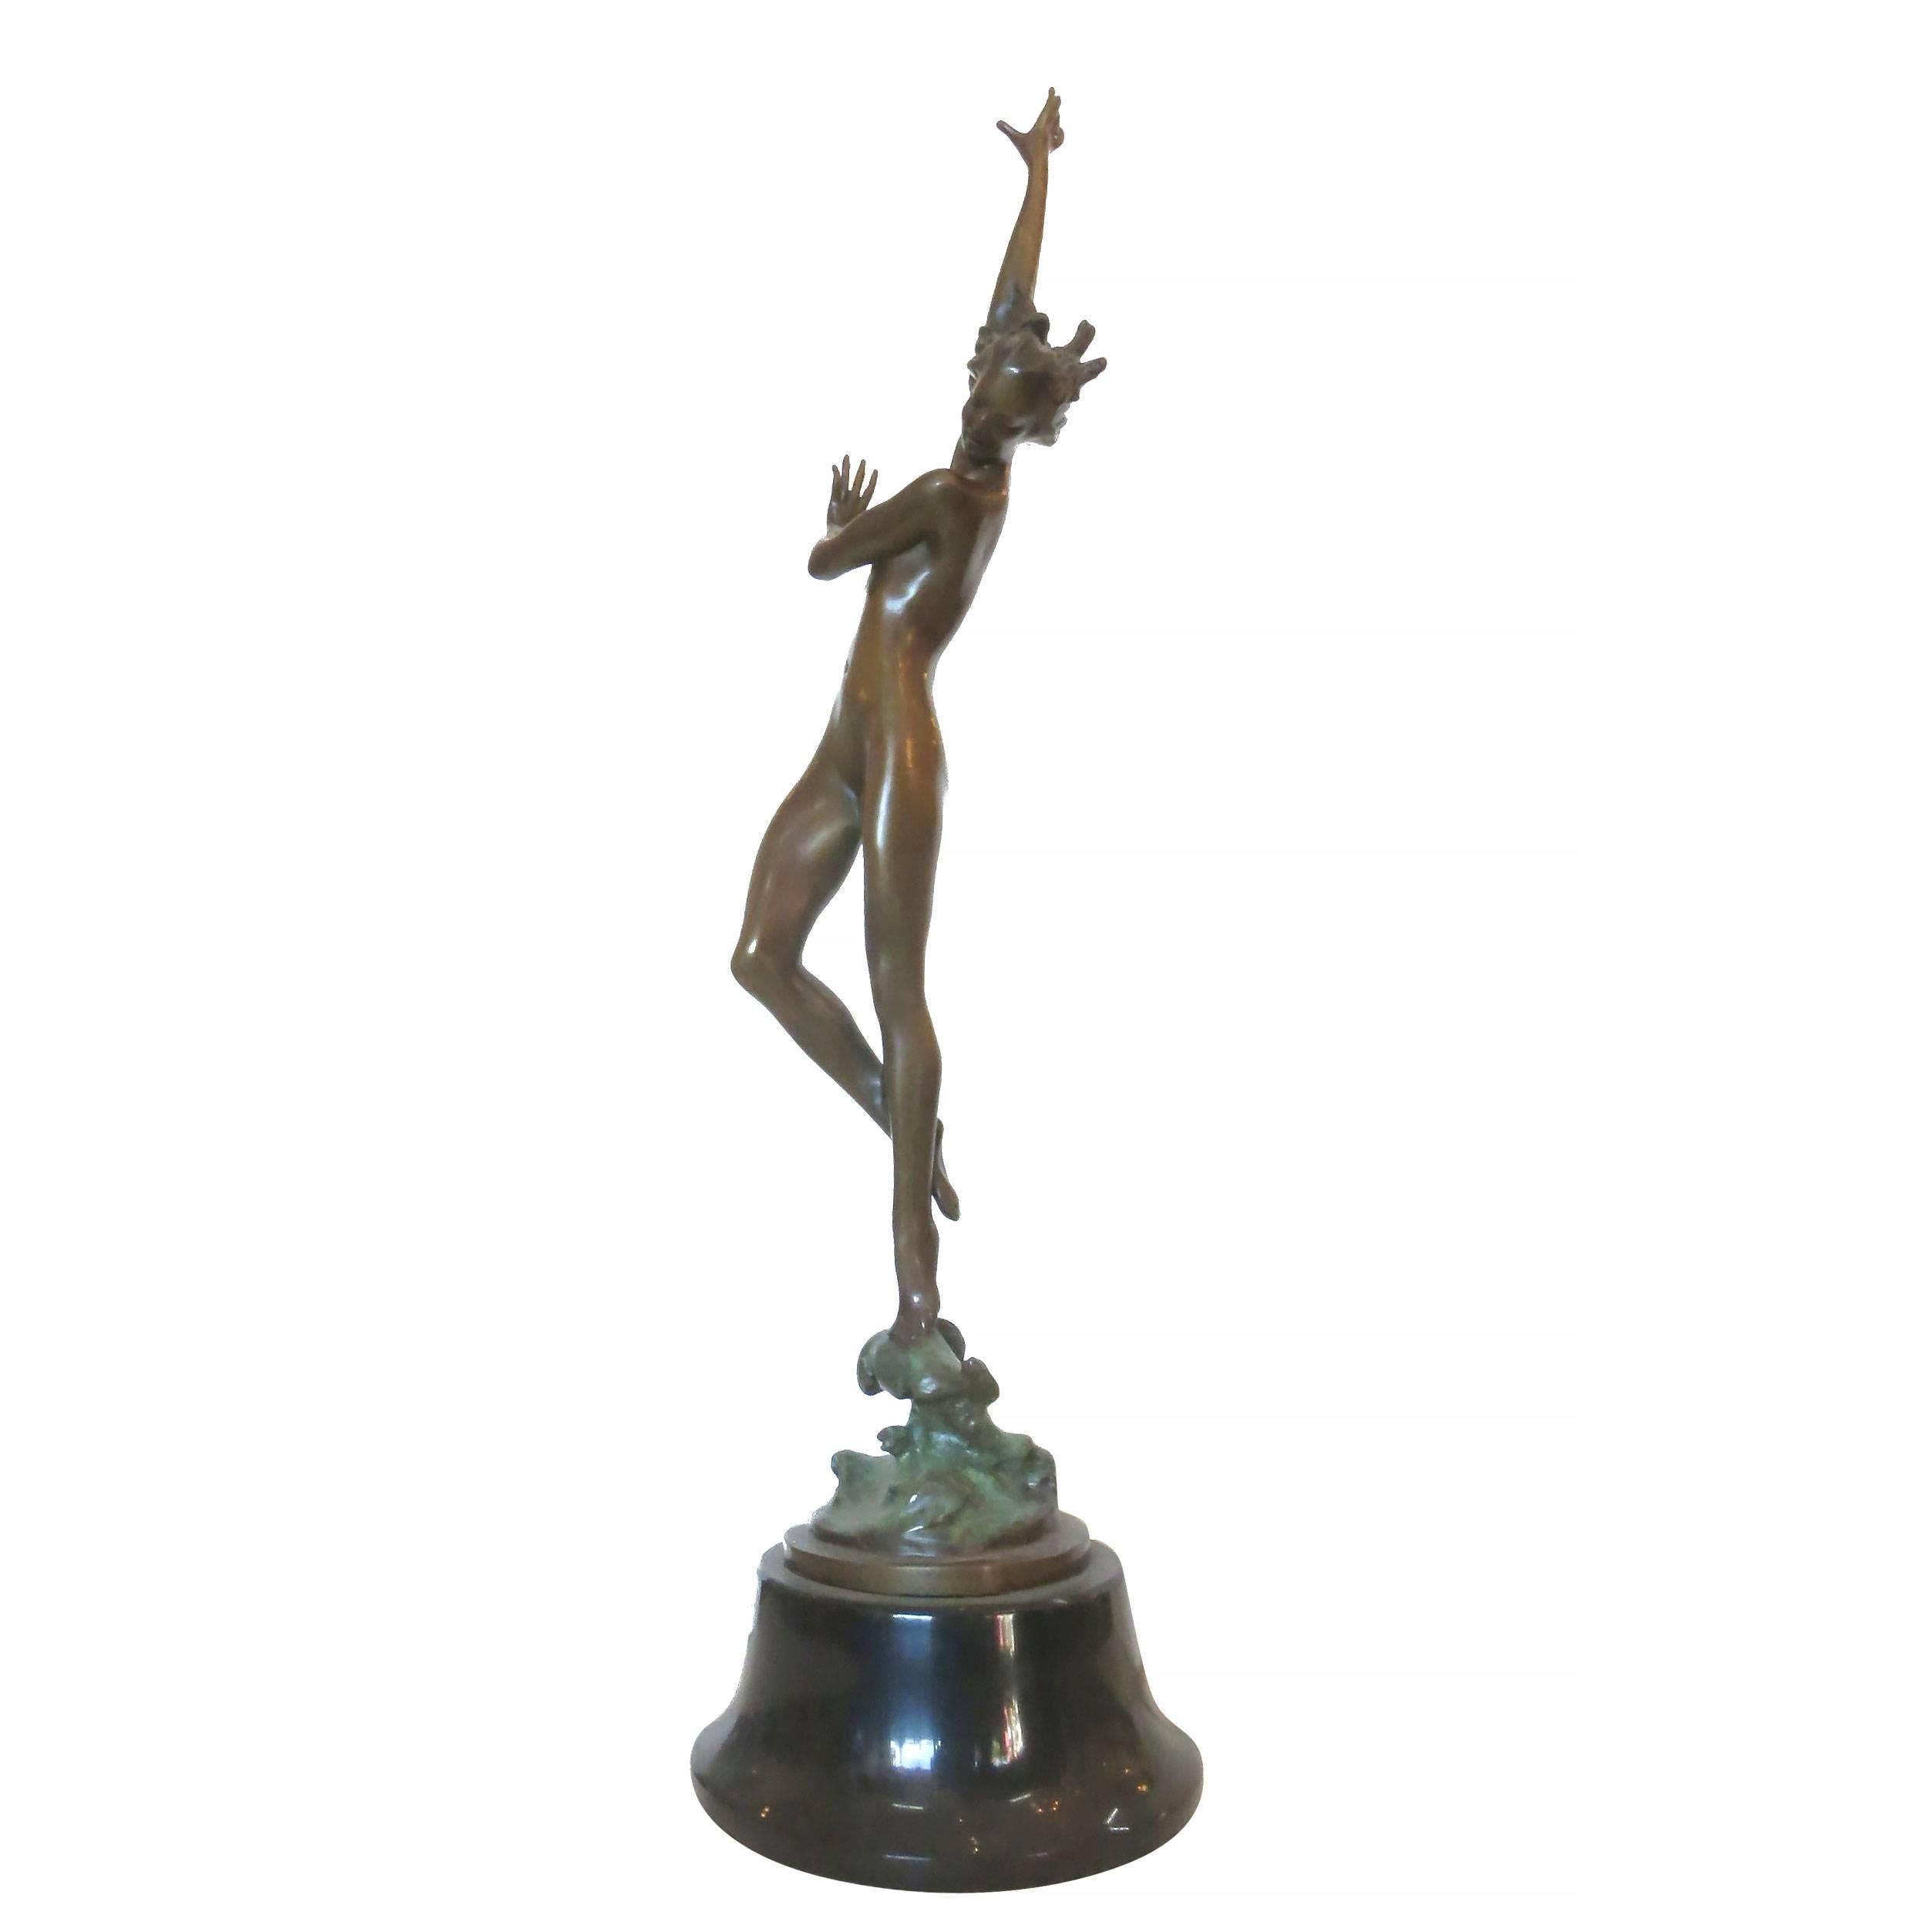 Art Deco style bronze figural nude dancer statue featuring a slender nude figural dancer fashioned after the works of Icart. The statue features an antique patina finish and stands on a marble base.

Product handcrafted in the USA with the highest